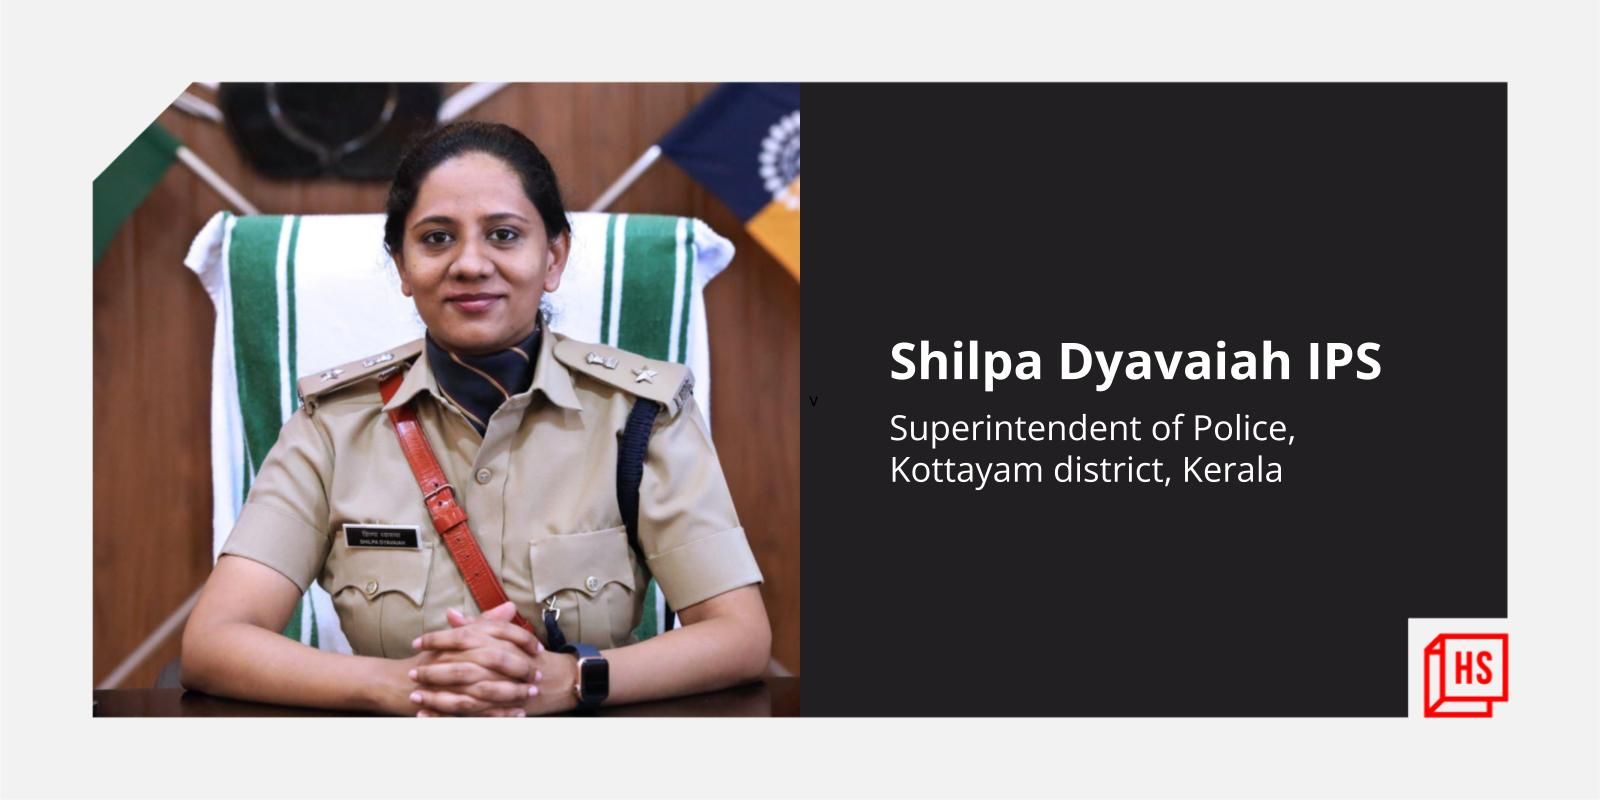 [Women in Governance] From corporate cabin to public office–the story of IPS officer Shilpa Dyavaiah